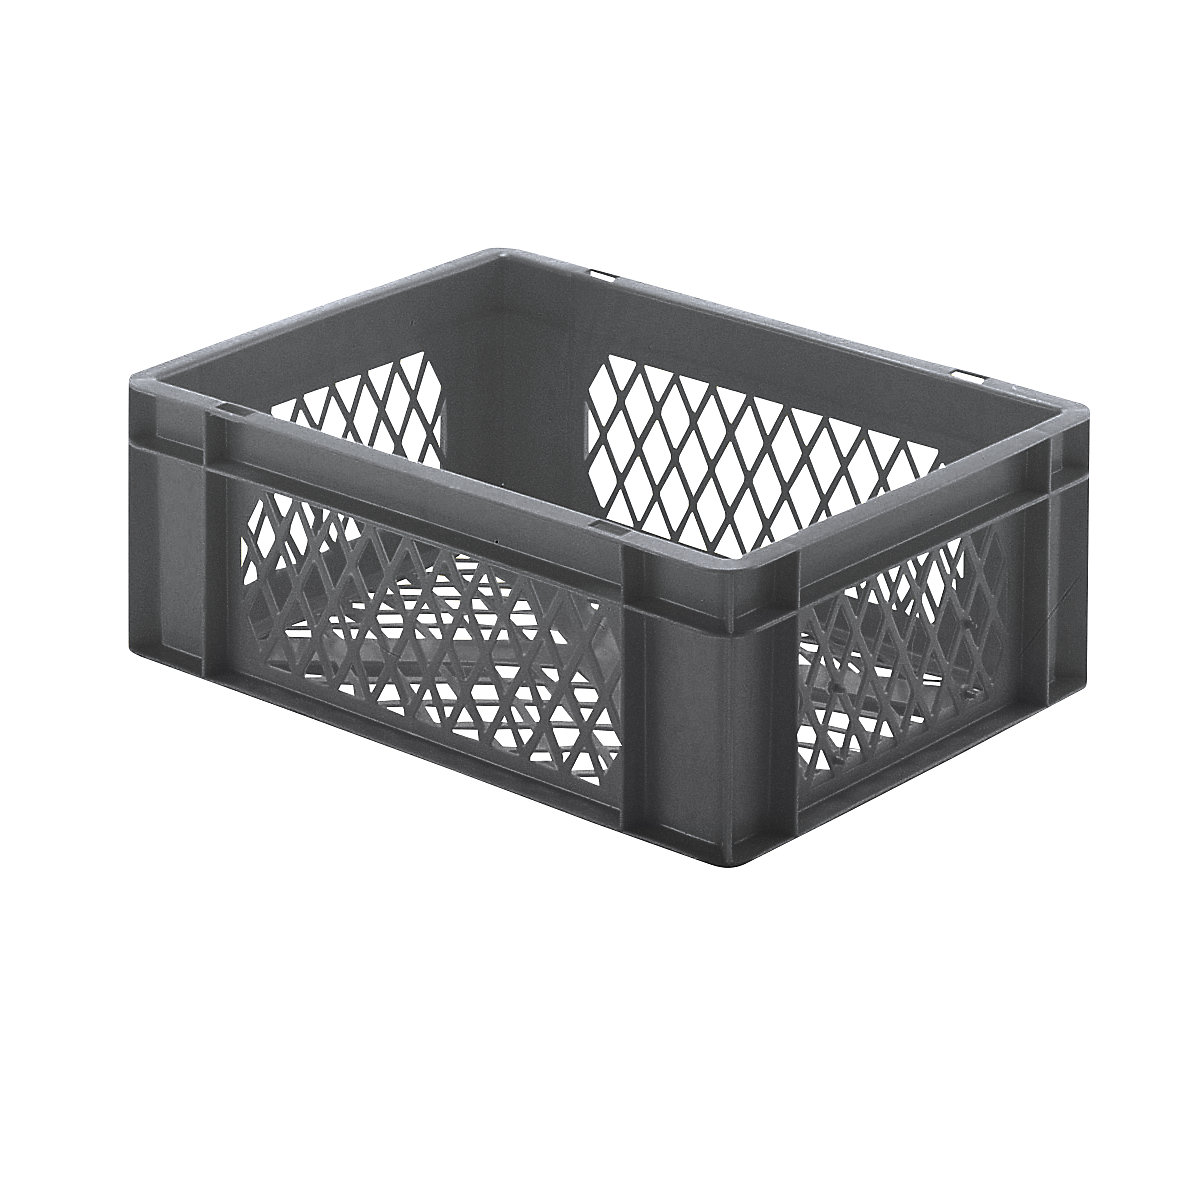 Euro stacking container, perforated walls and base, LxWxH 400 x 300 x 145 mm, grey, pack of 5